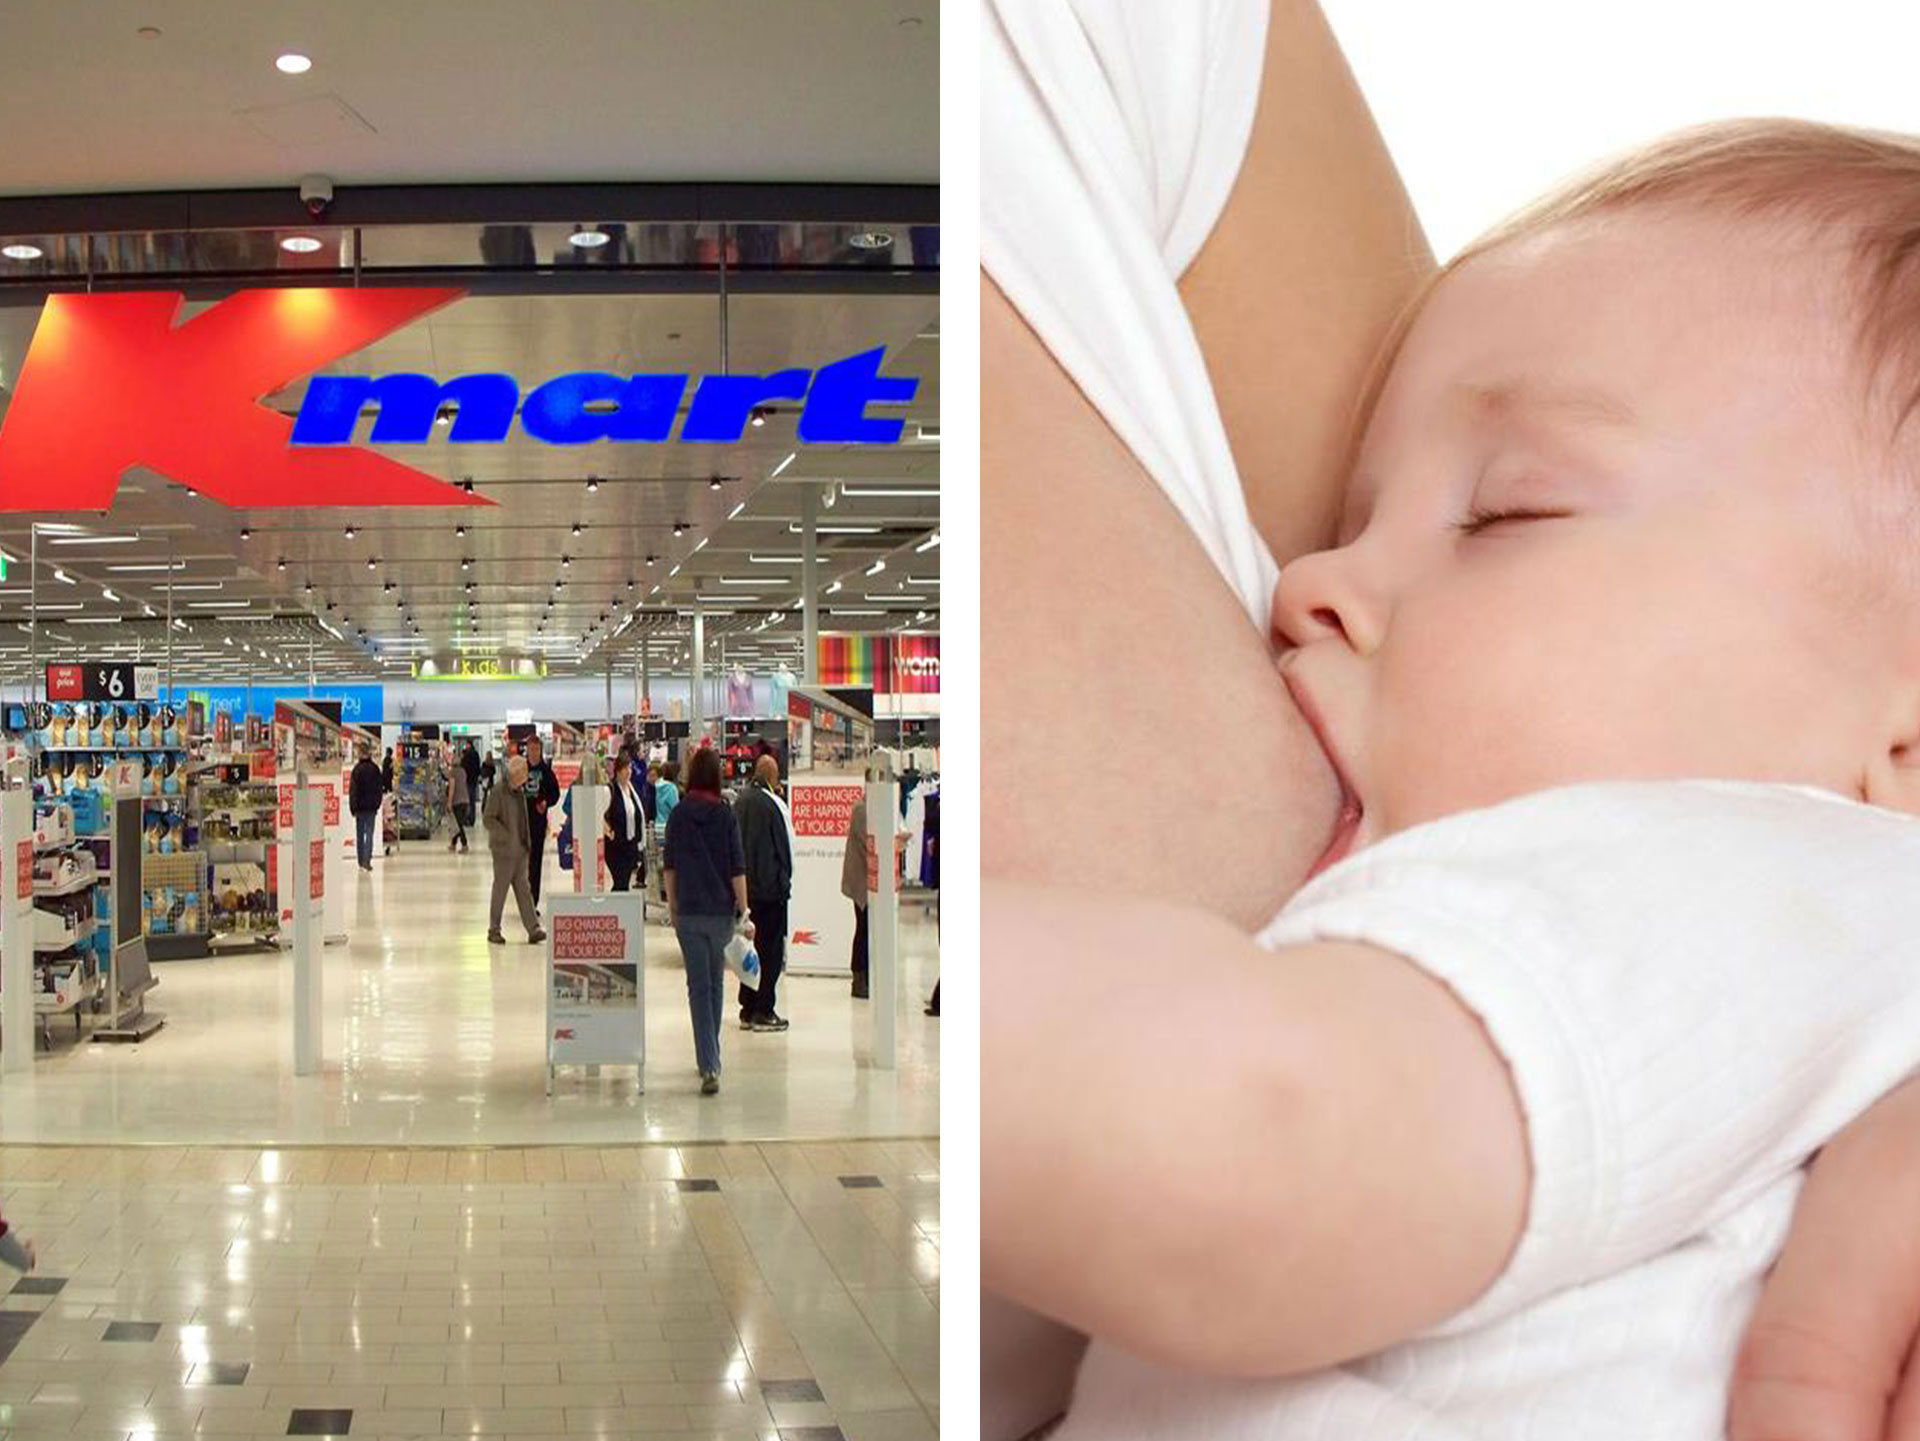 Cairns Kmart store faces ‘flash mob’ protest over breastfeeding discrimination